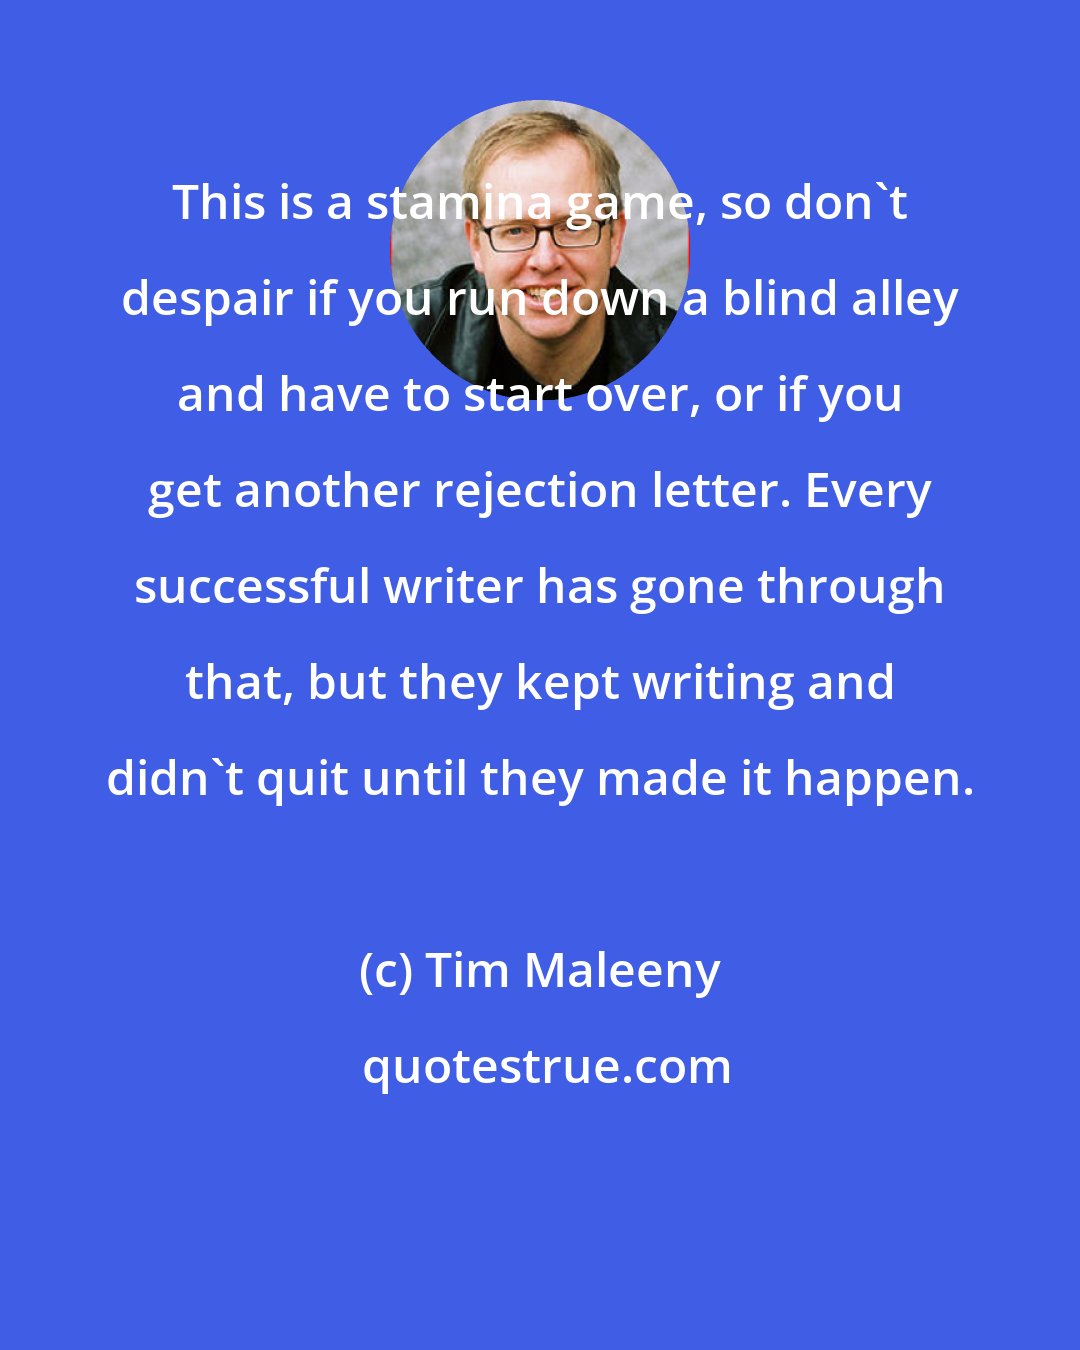 Tim Maleeny: This is a stamina game, so don't despair if you run down a blind alley and have to start over, or if you get another rejection letter. Every successful writer has gone through that, but they kept writing and didn't quit until they made it happen.